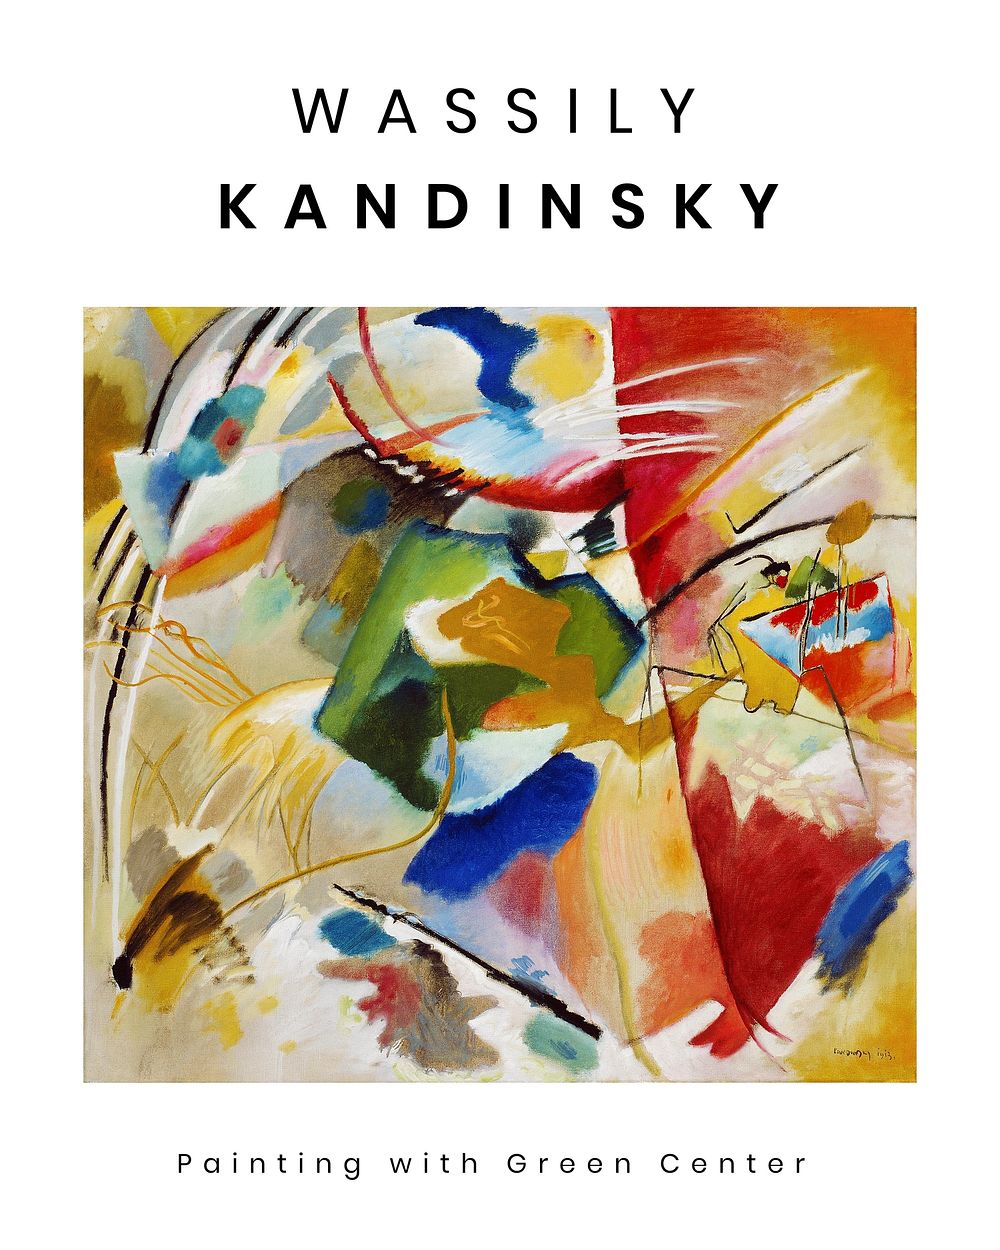 Wassily Kandinsky poster, famous abstract art painting with Green Center (1913). Original from The Art Institute of Chicago.…